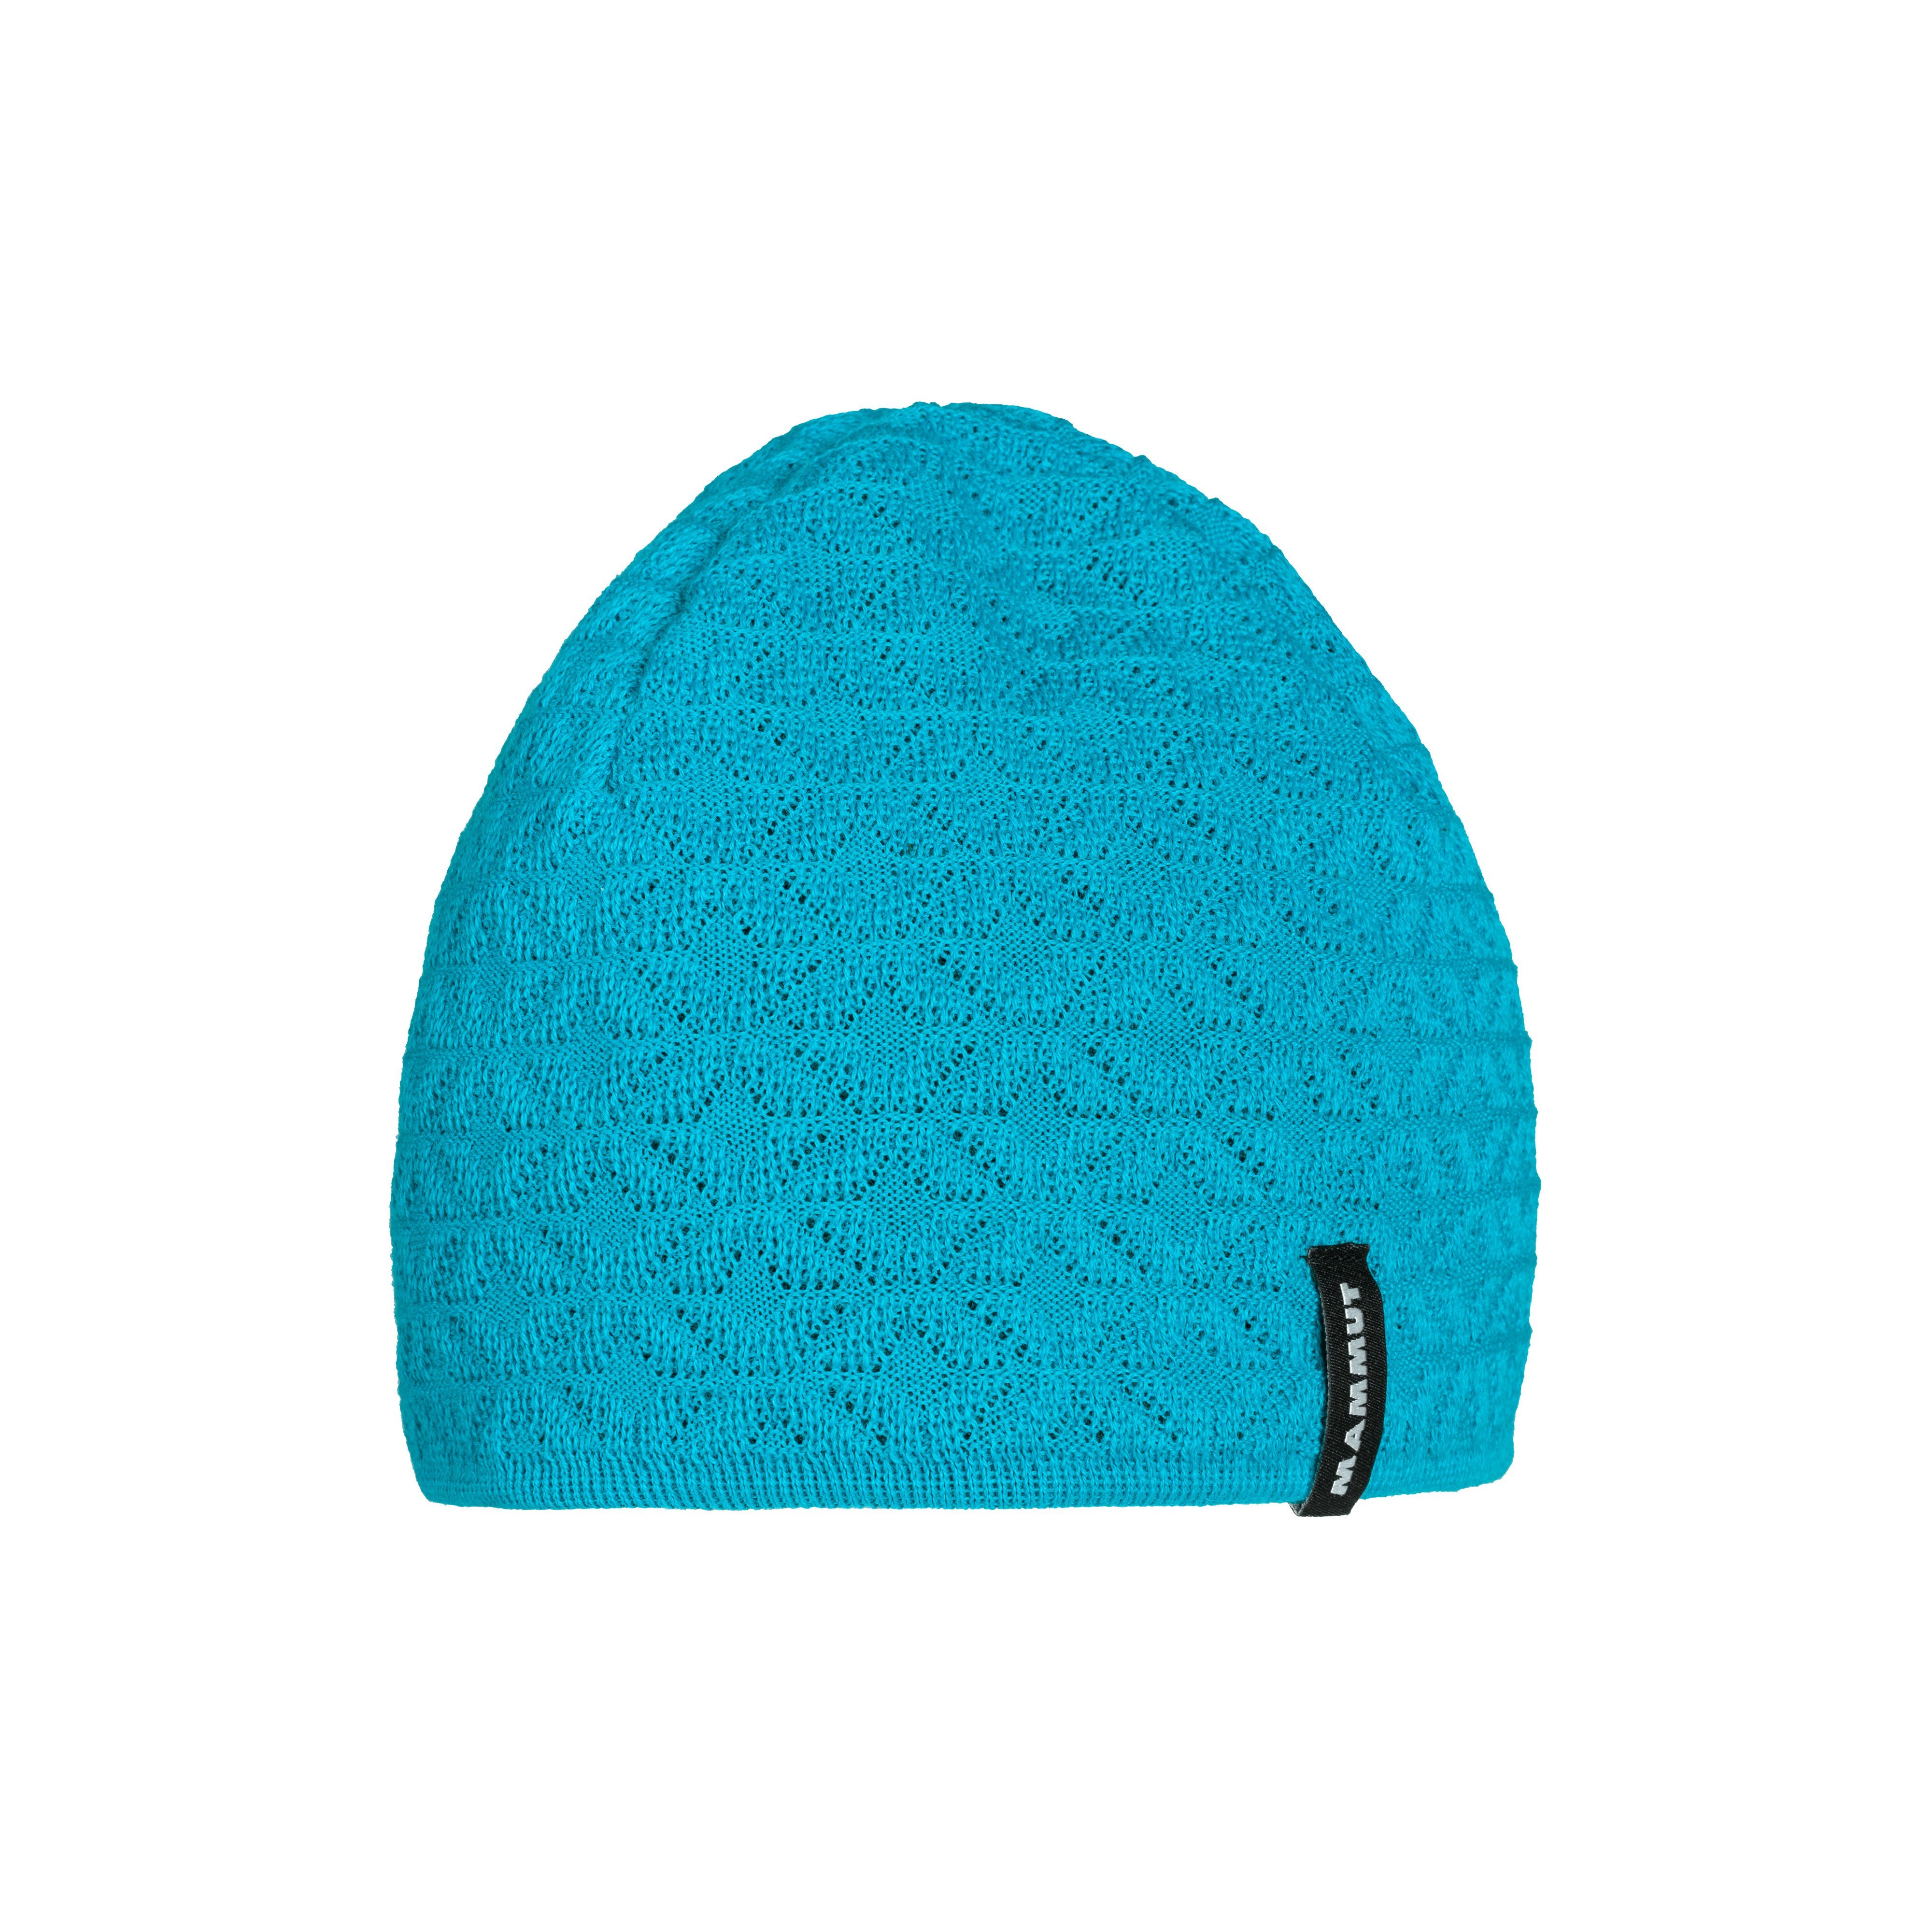 Nordwand Beanie - sky-night, one size product image